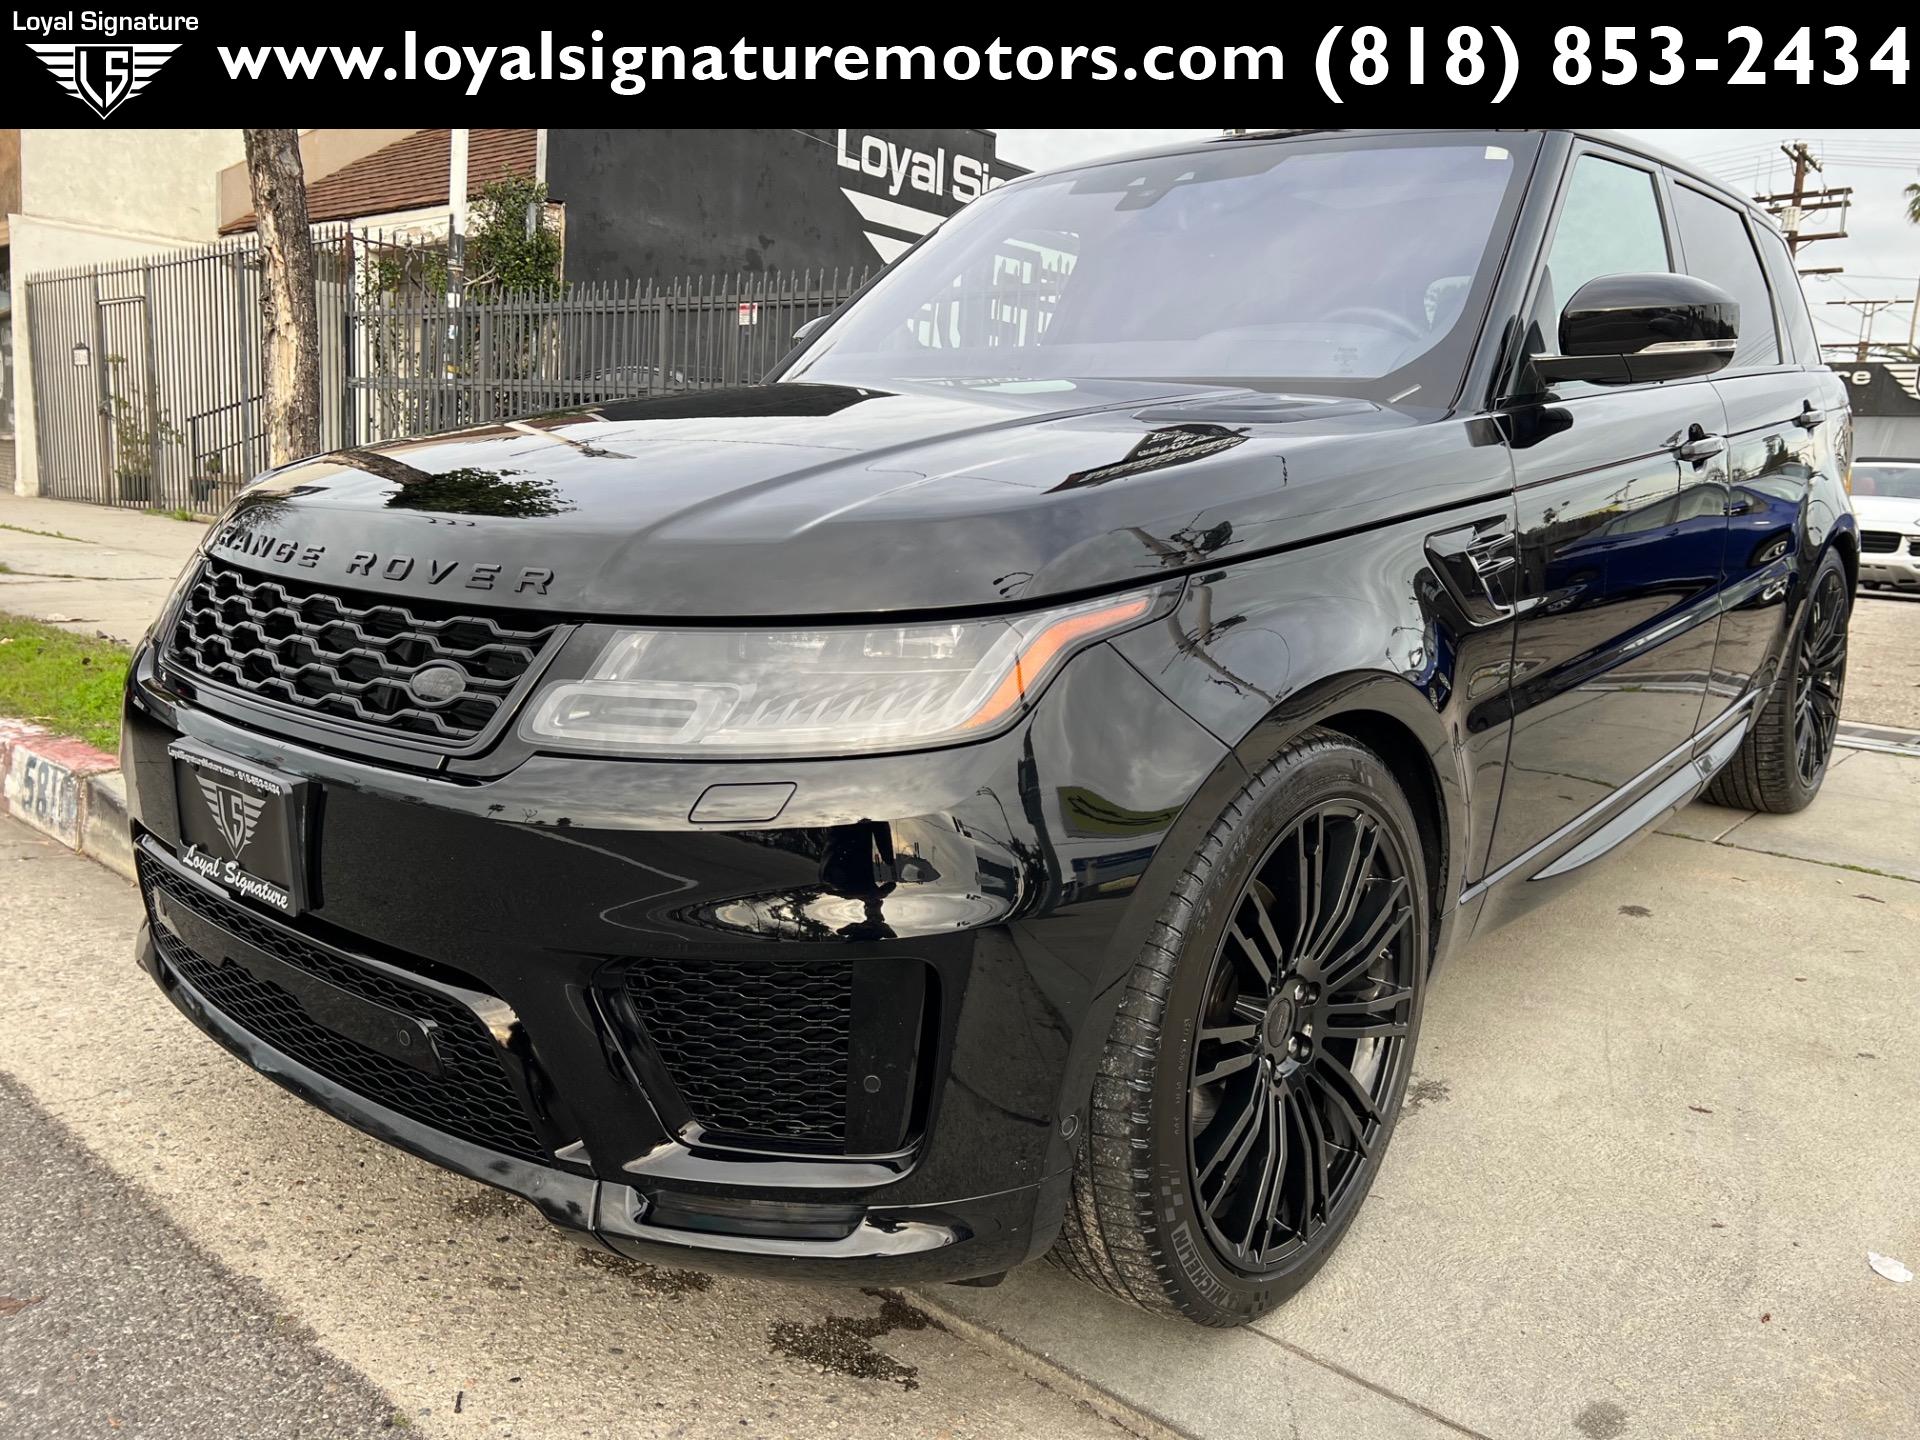 Used-2018-Land-Rover-Range-Rover-Sport-HSE-Td6